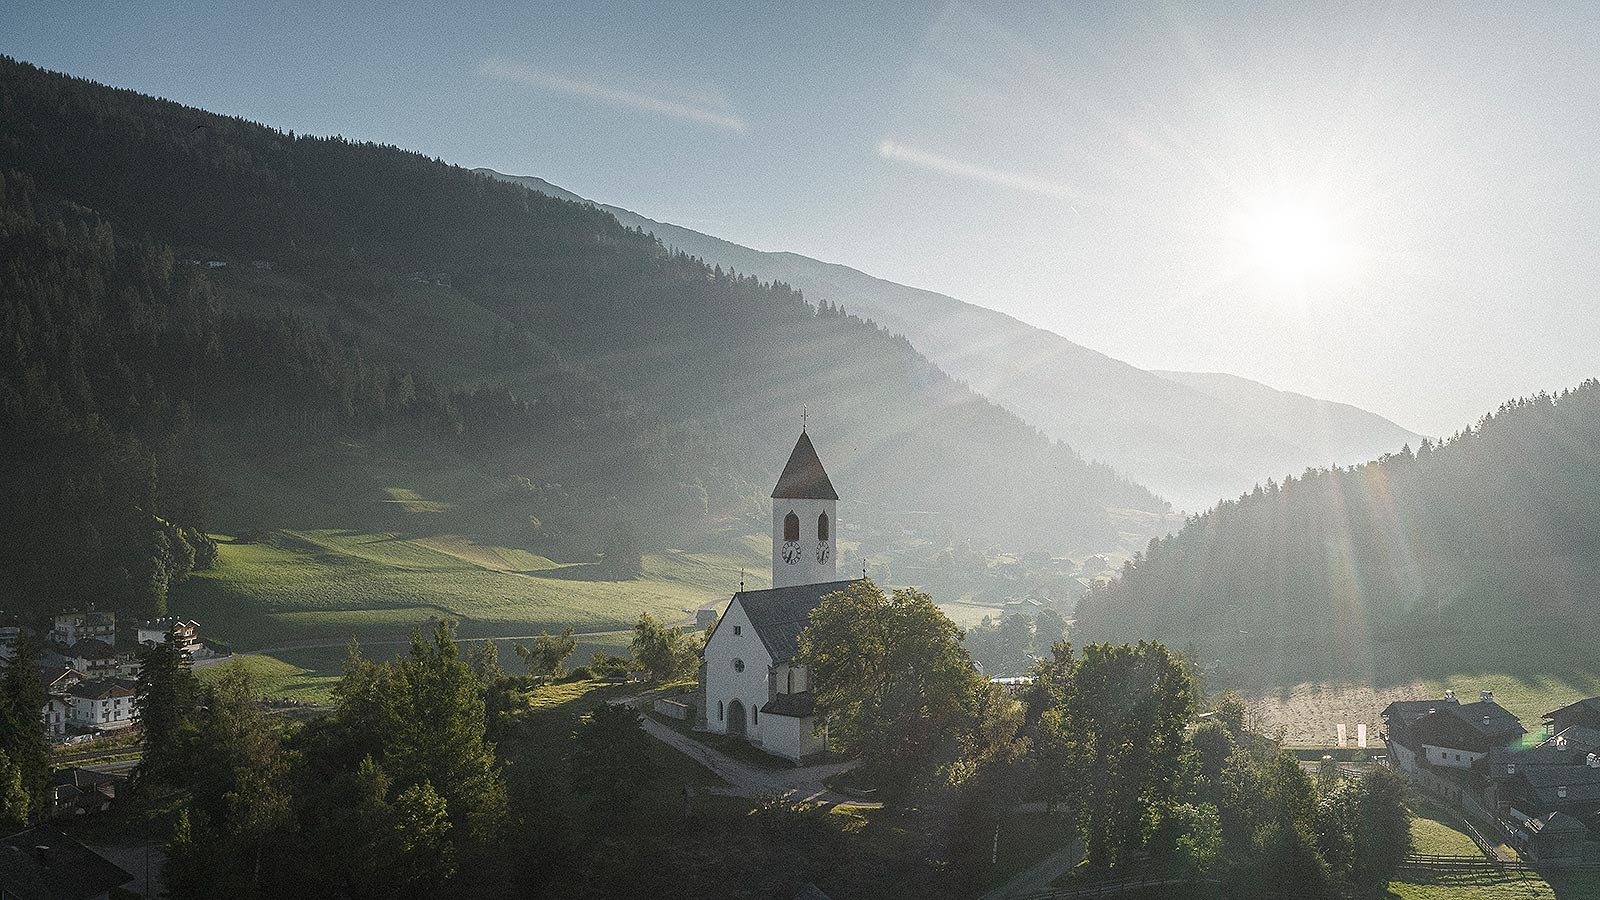 Small white church with bell tower in the middle of the hills of Val Pusteria illuminated by the sun in the late afternoon.